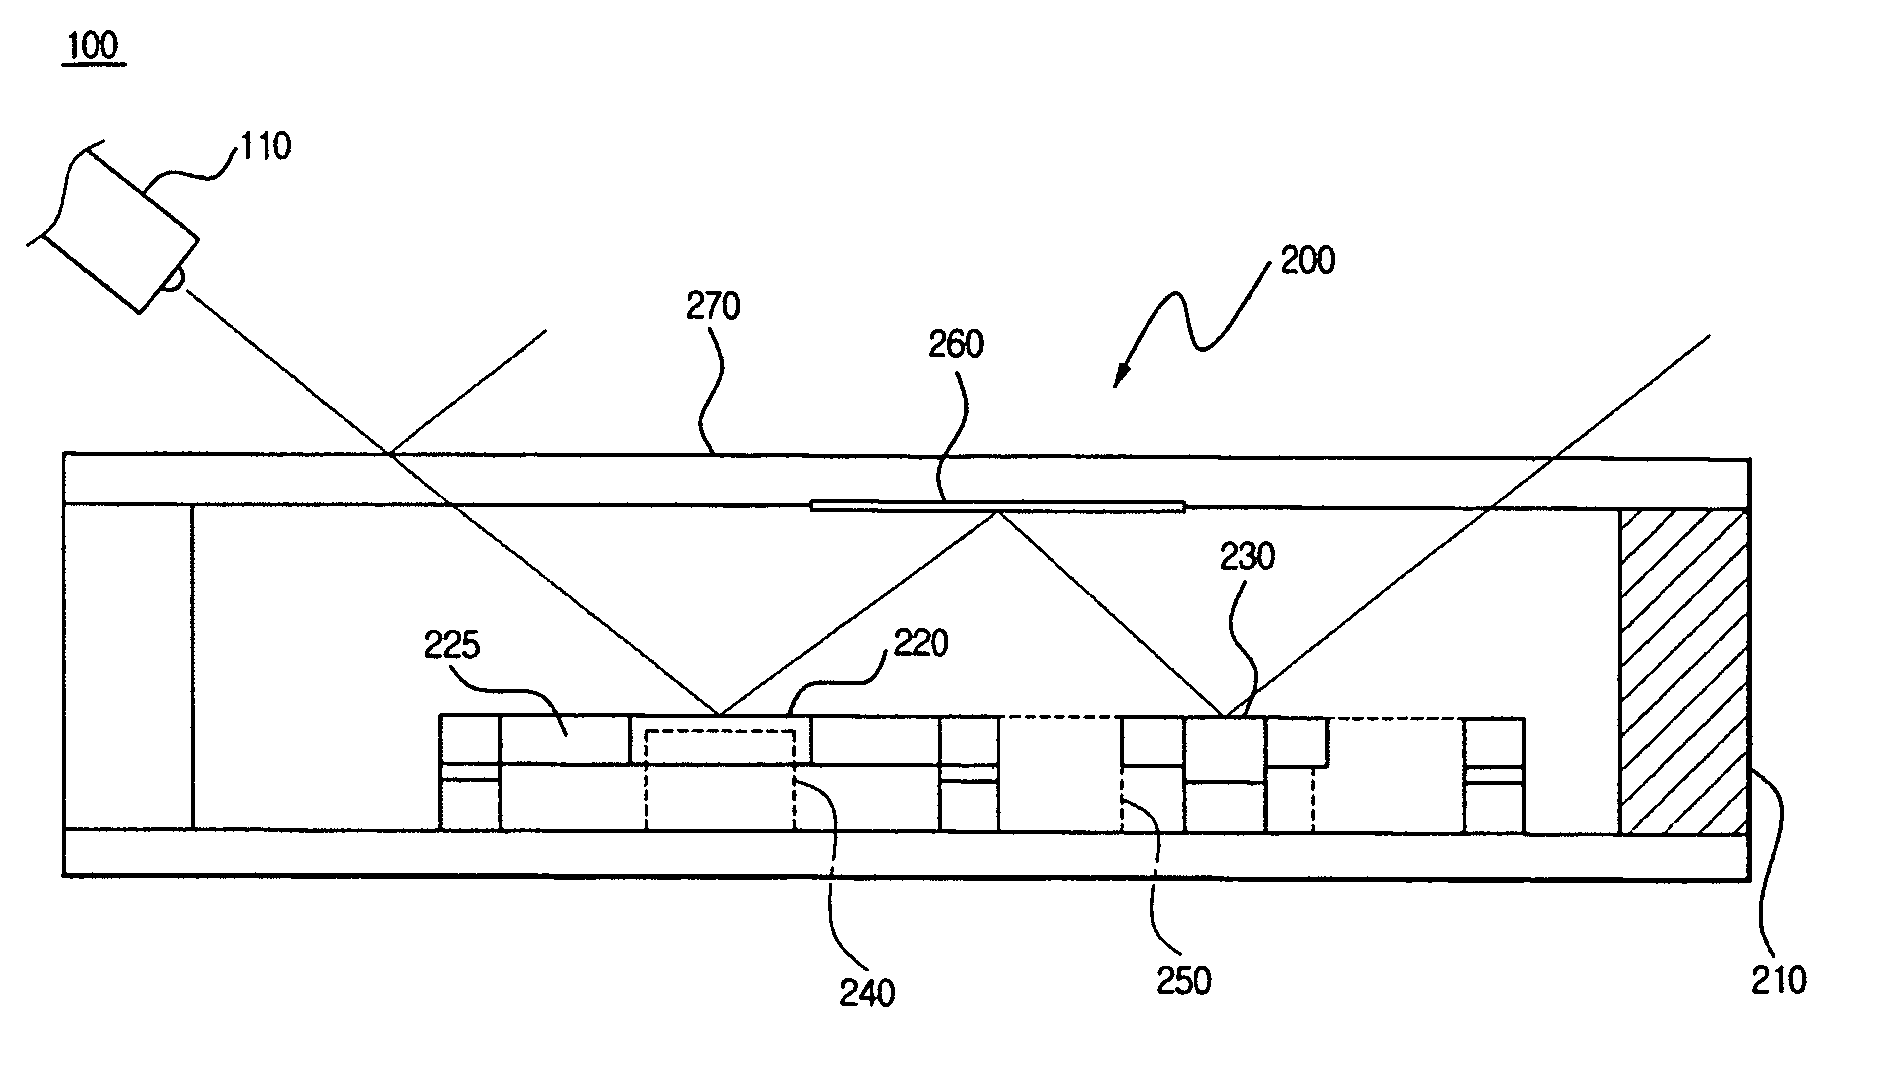 Mirror package scanning apparatus and method